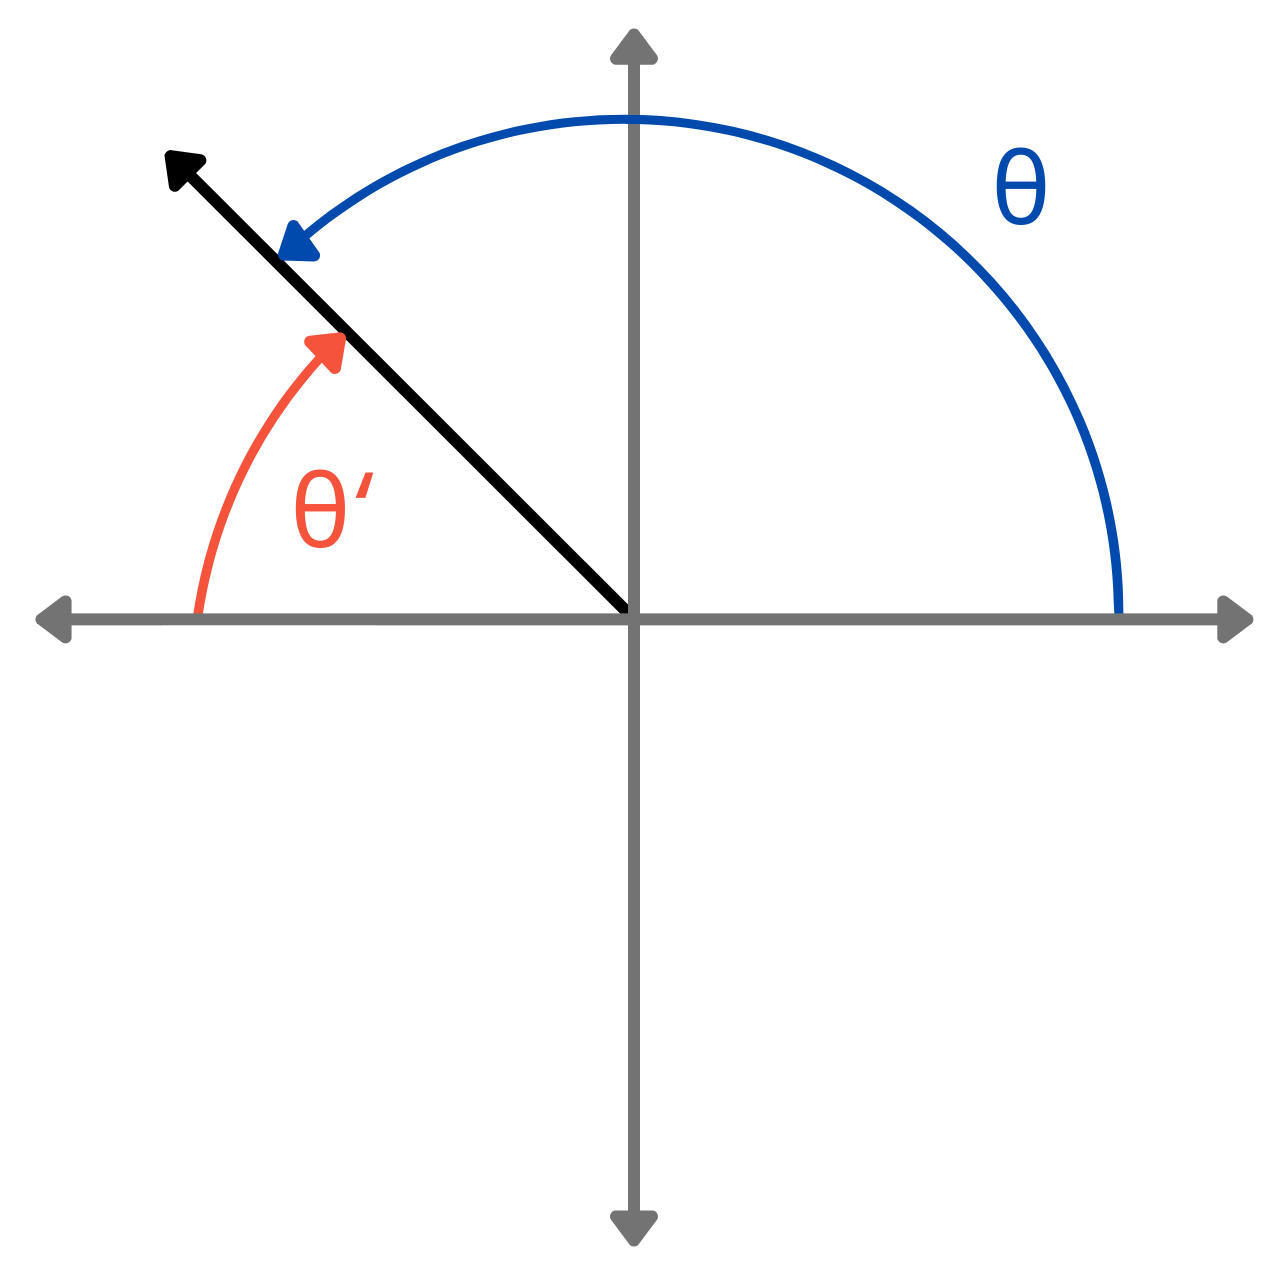 graphic showing the reference angle for a given angle in quadrant 2